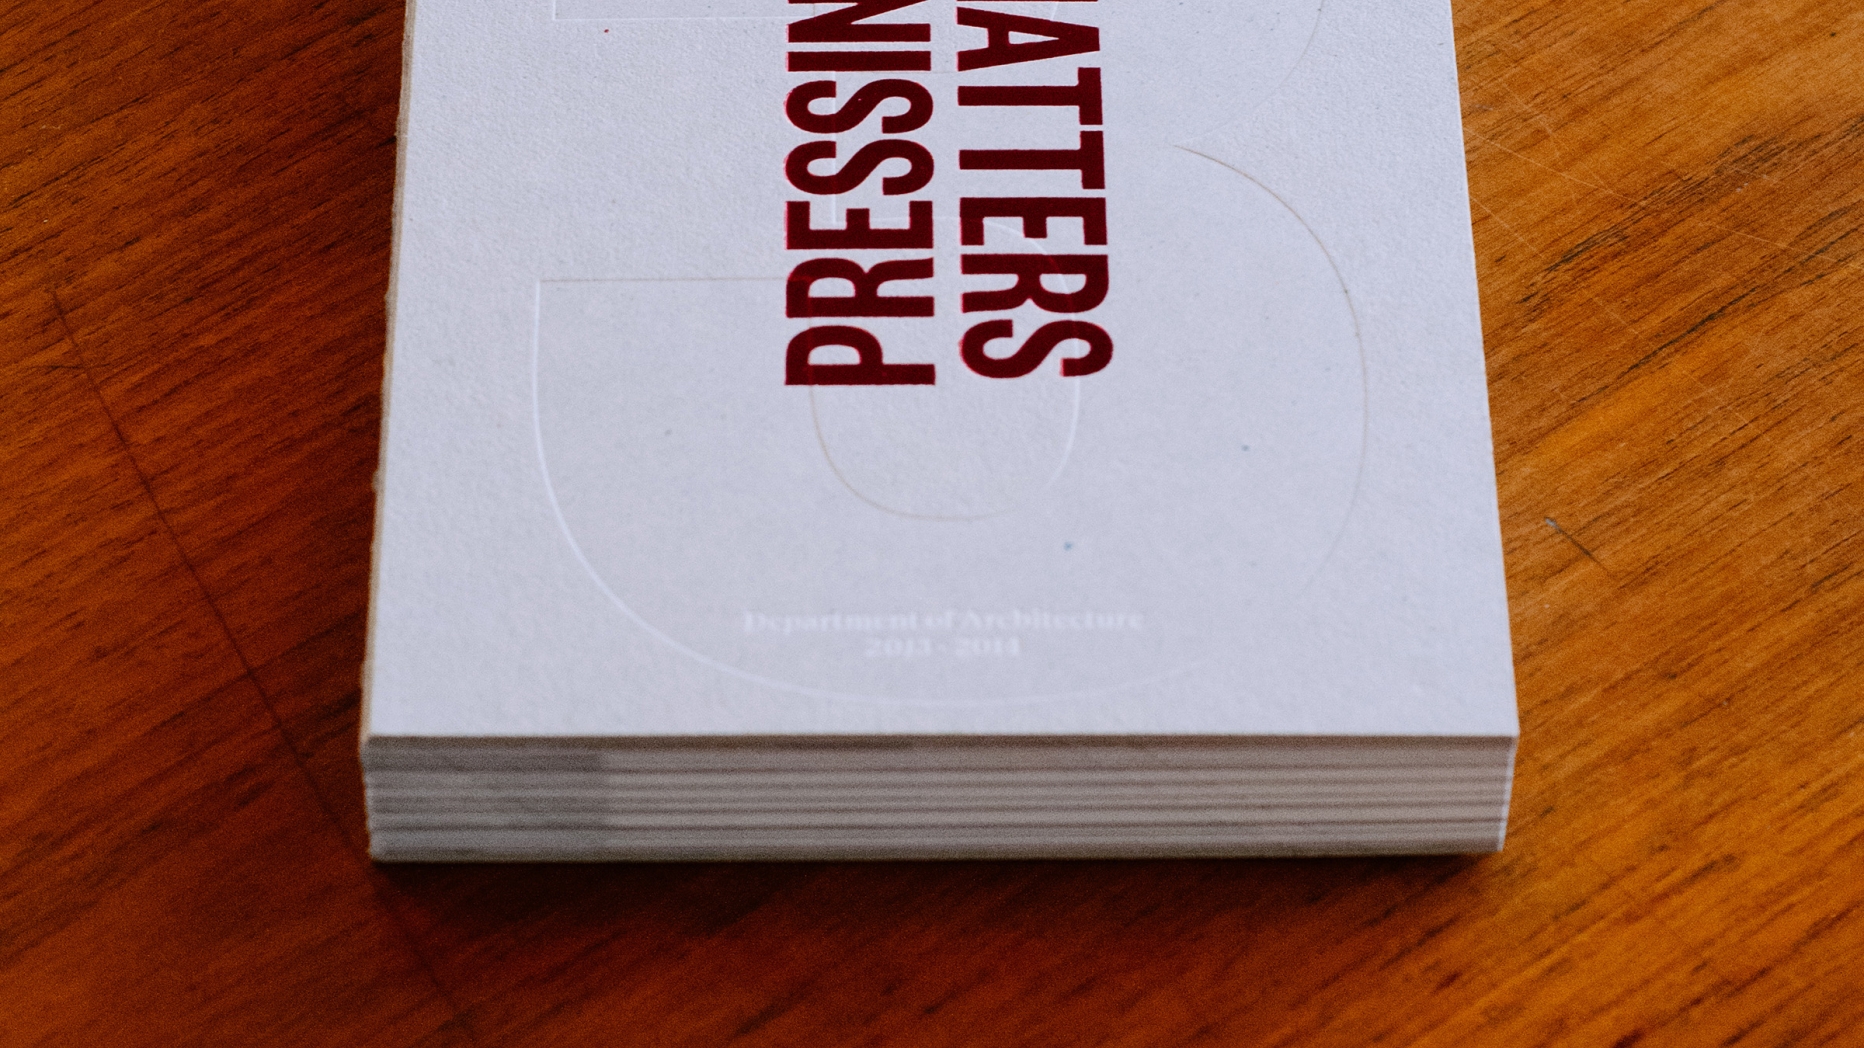 Copy of publication 'Pressing Matters 3"on wooden table.